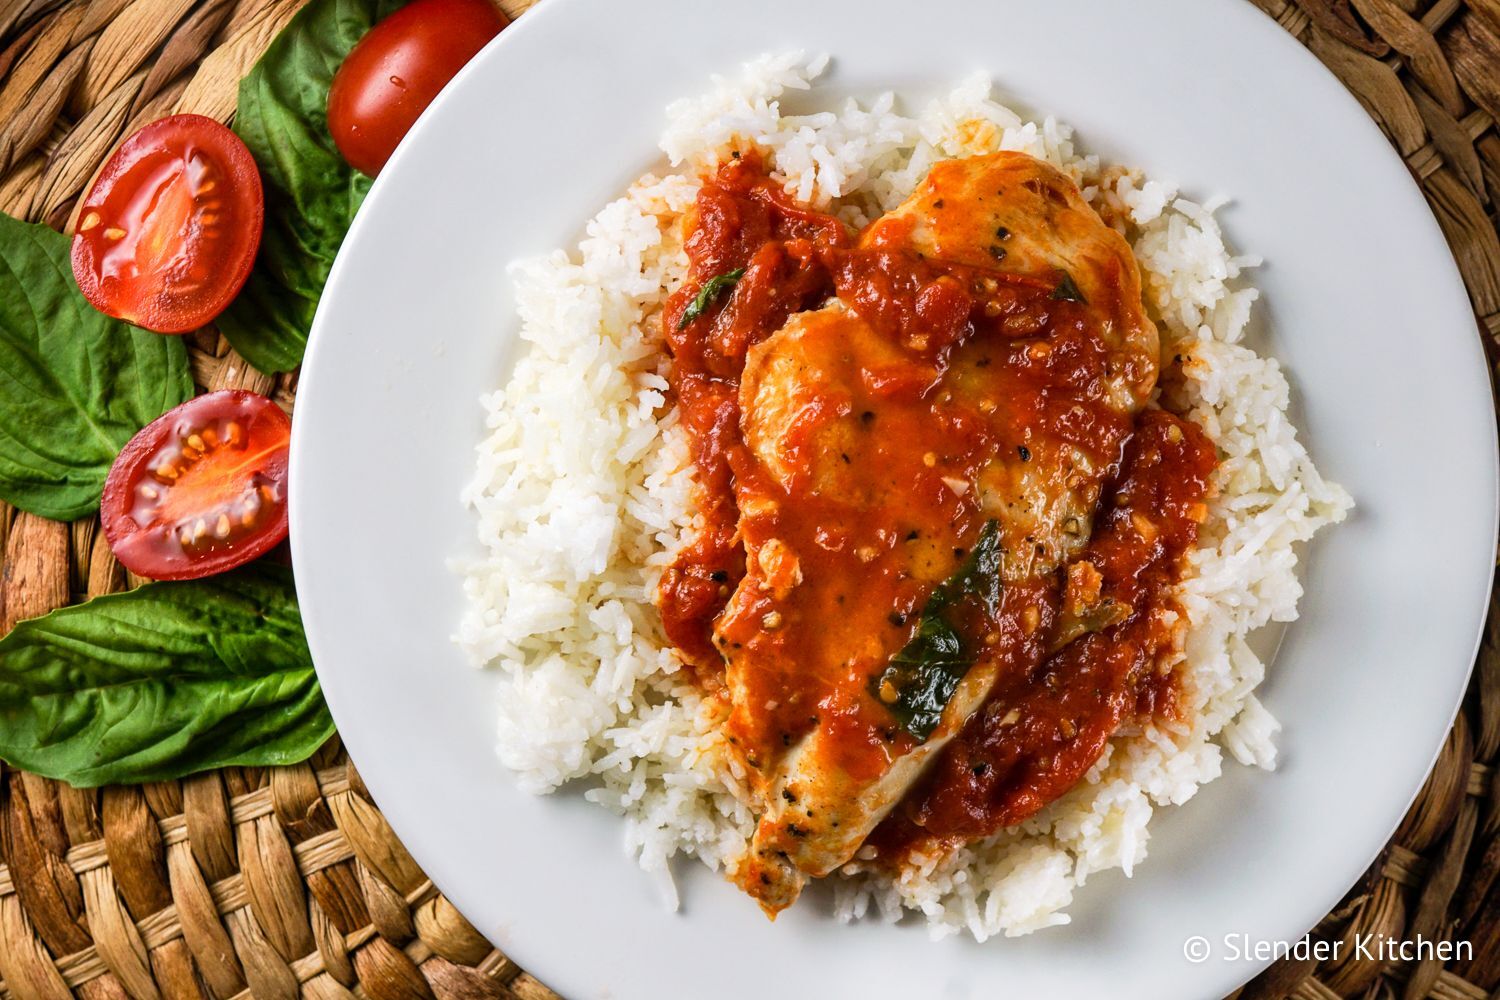 Tomato basil chicken with chicken breast served in a hearty tomato sauce with basil served over rice.